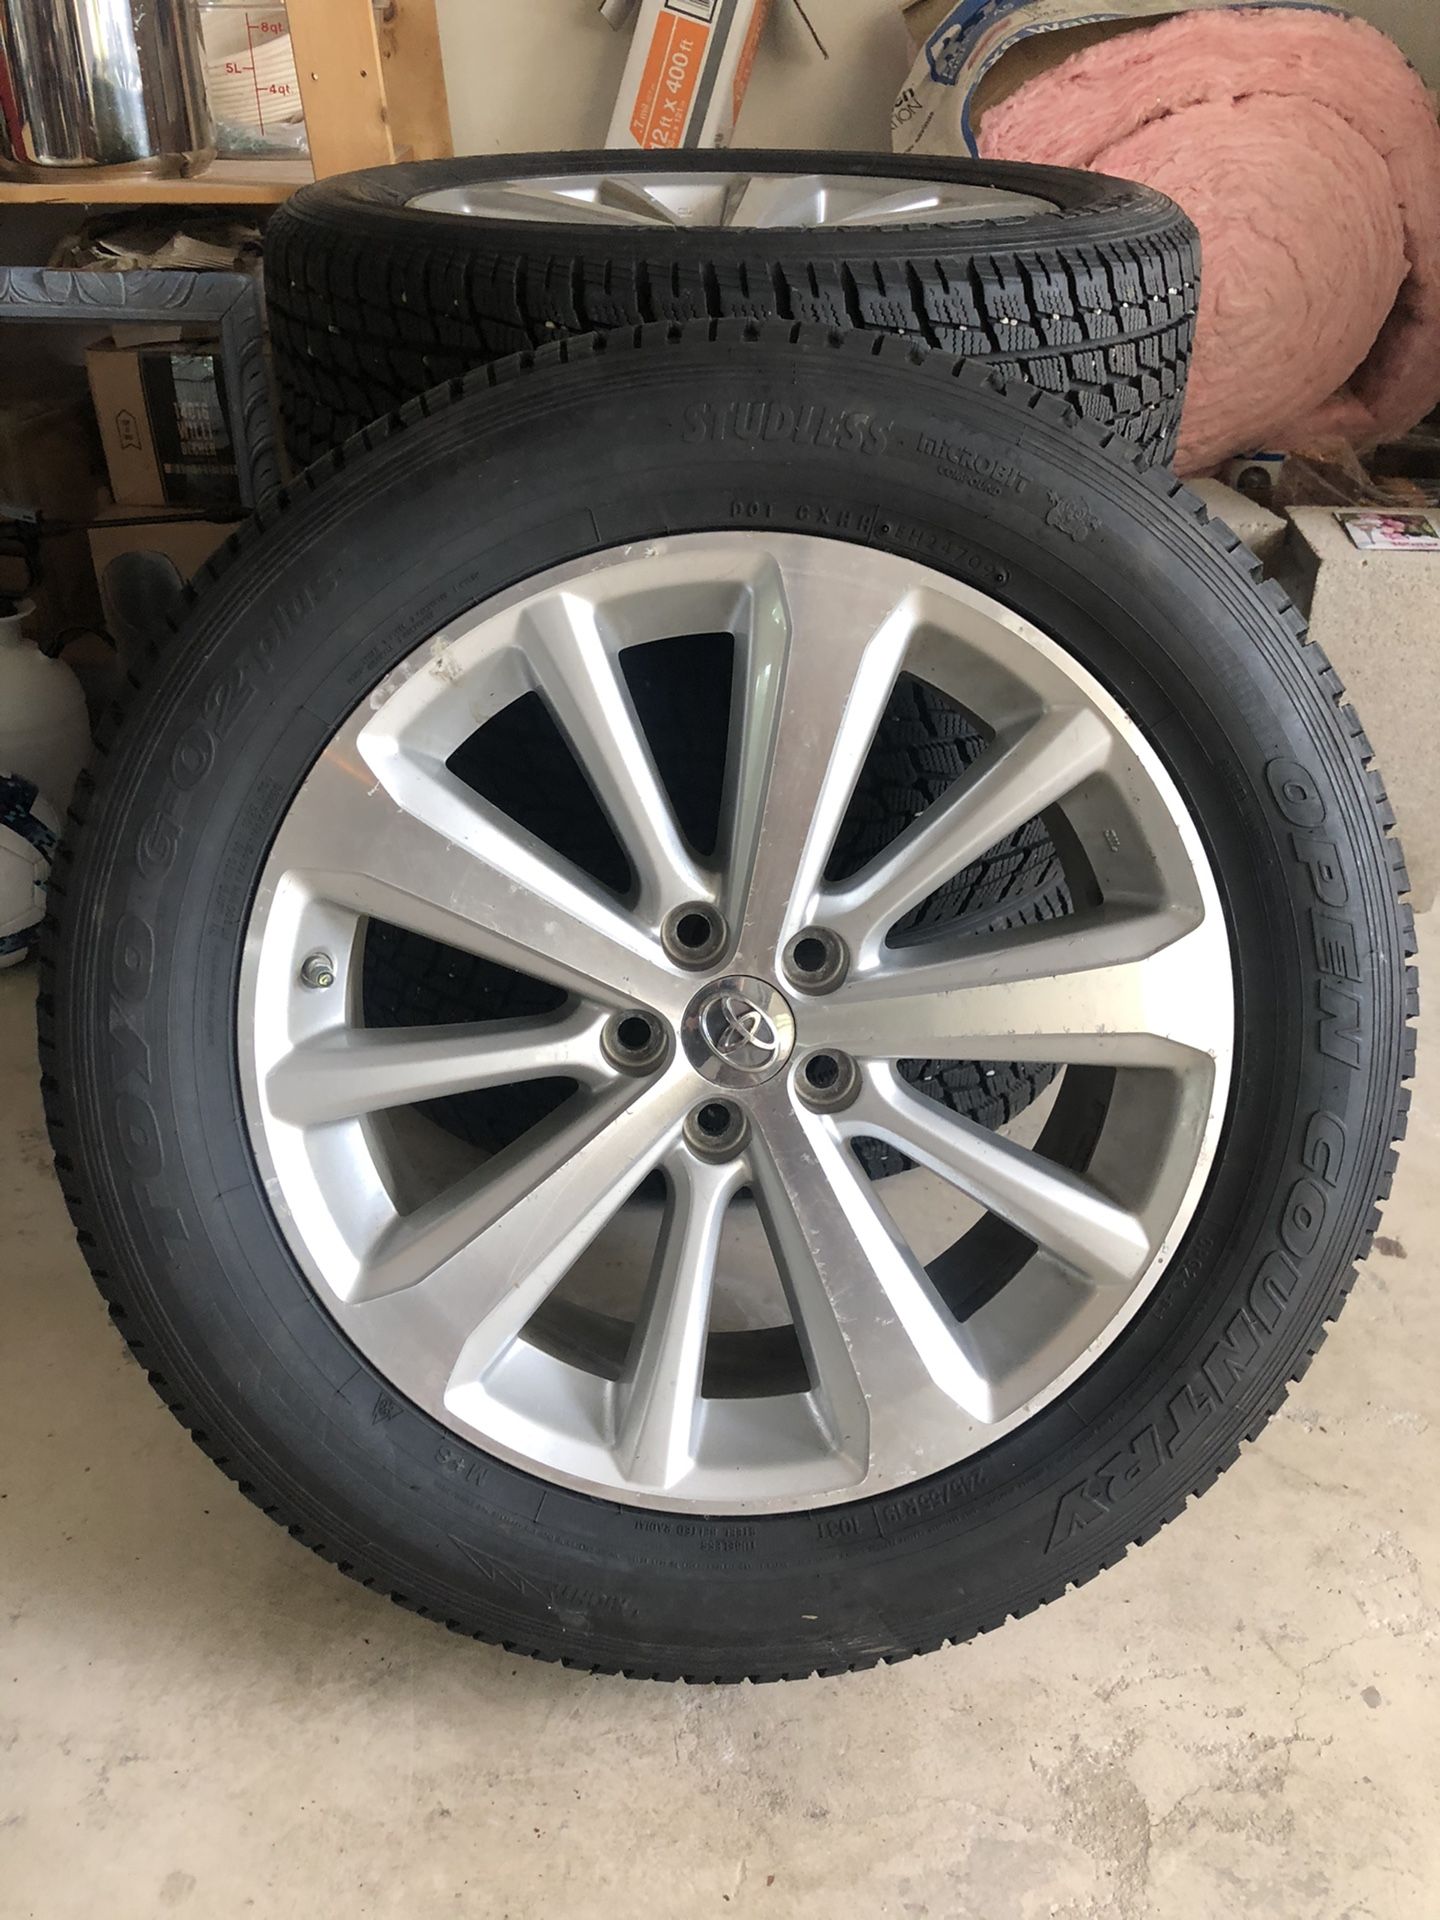 Toyo tires and rims